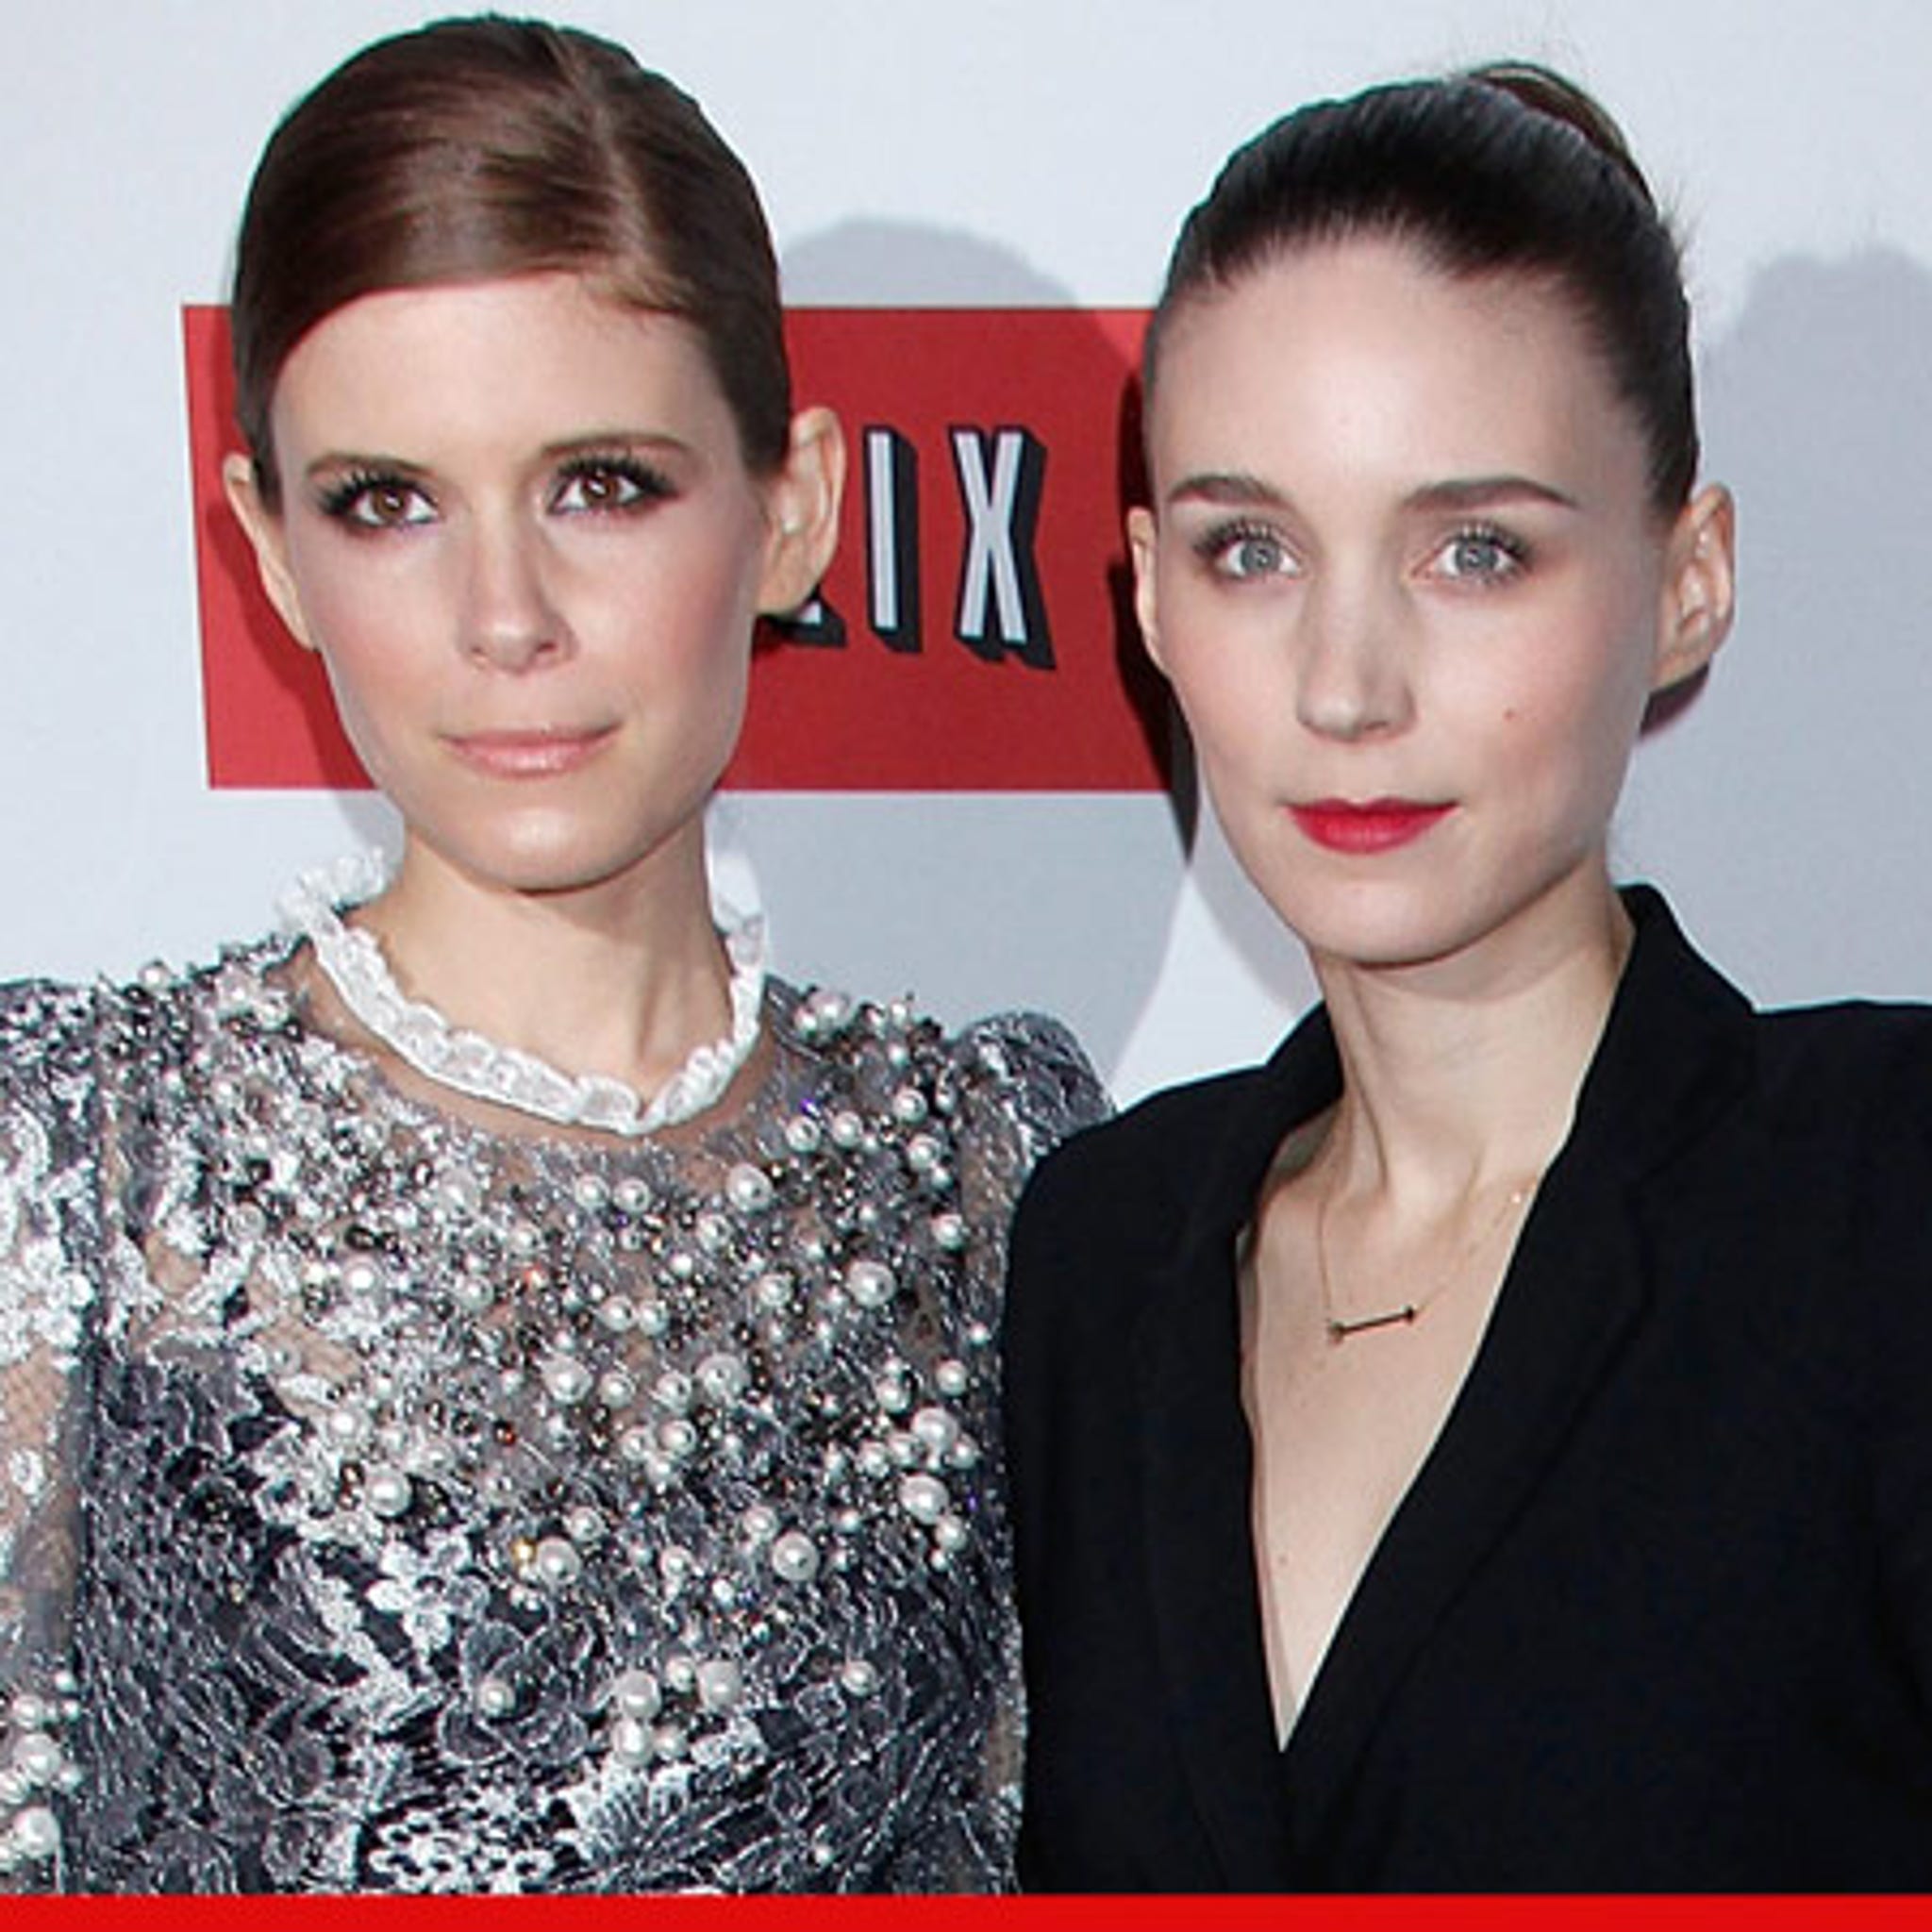 modvirke kat venstre Kate vs. Rooney -- Which Mara Sister Would You Rather?